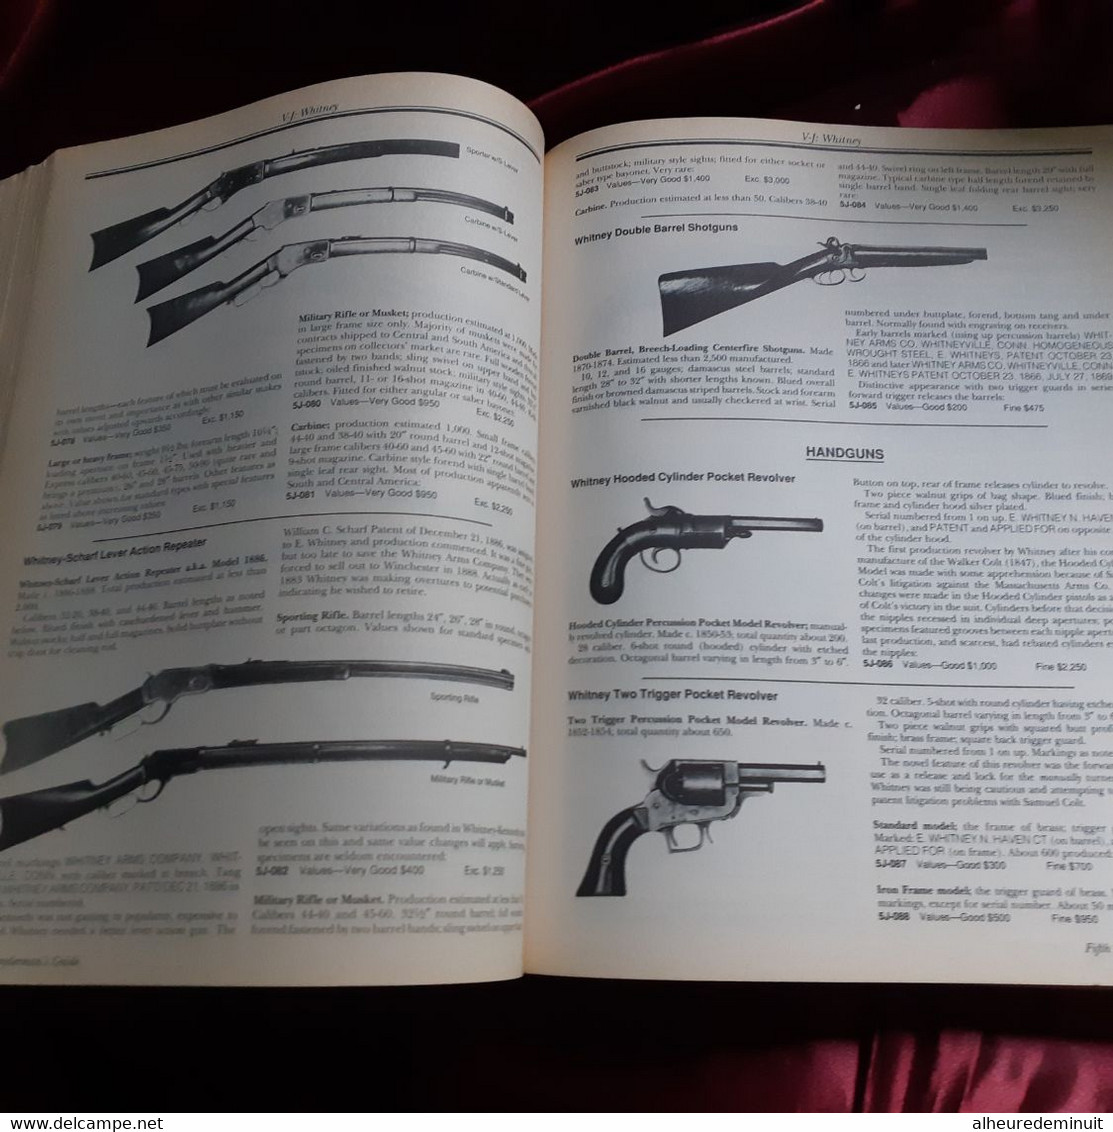 Flayderman's Guide To Antique American Firearms"1990"Armes"fusils"révolvers"complete Handbook Of American Gun Collecting - Forze Armate Americane